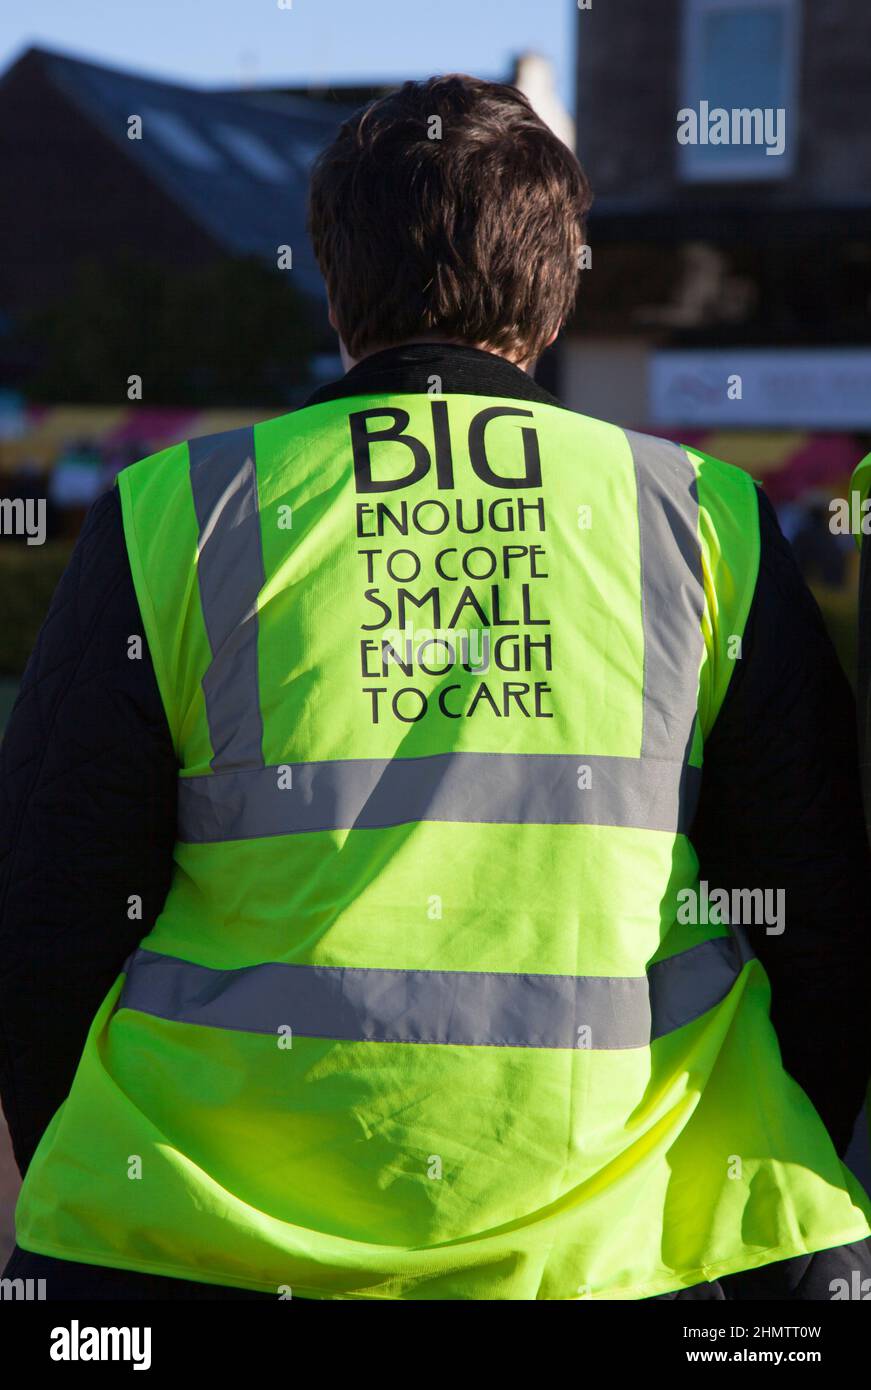 Slogan on back of hi-vis vest - Big enought to cope, Small enough to care. Stock Photo